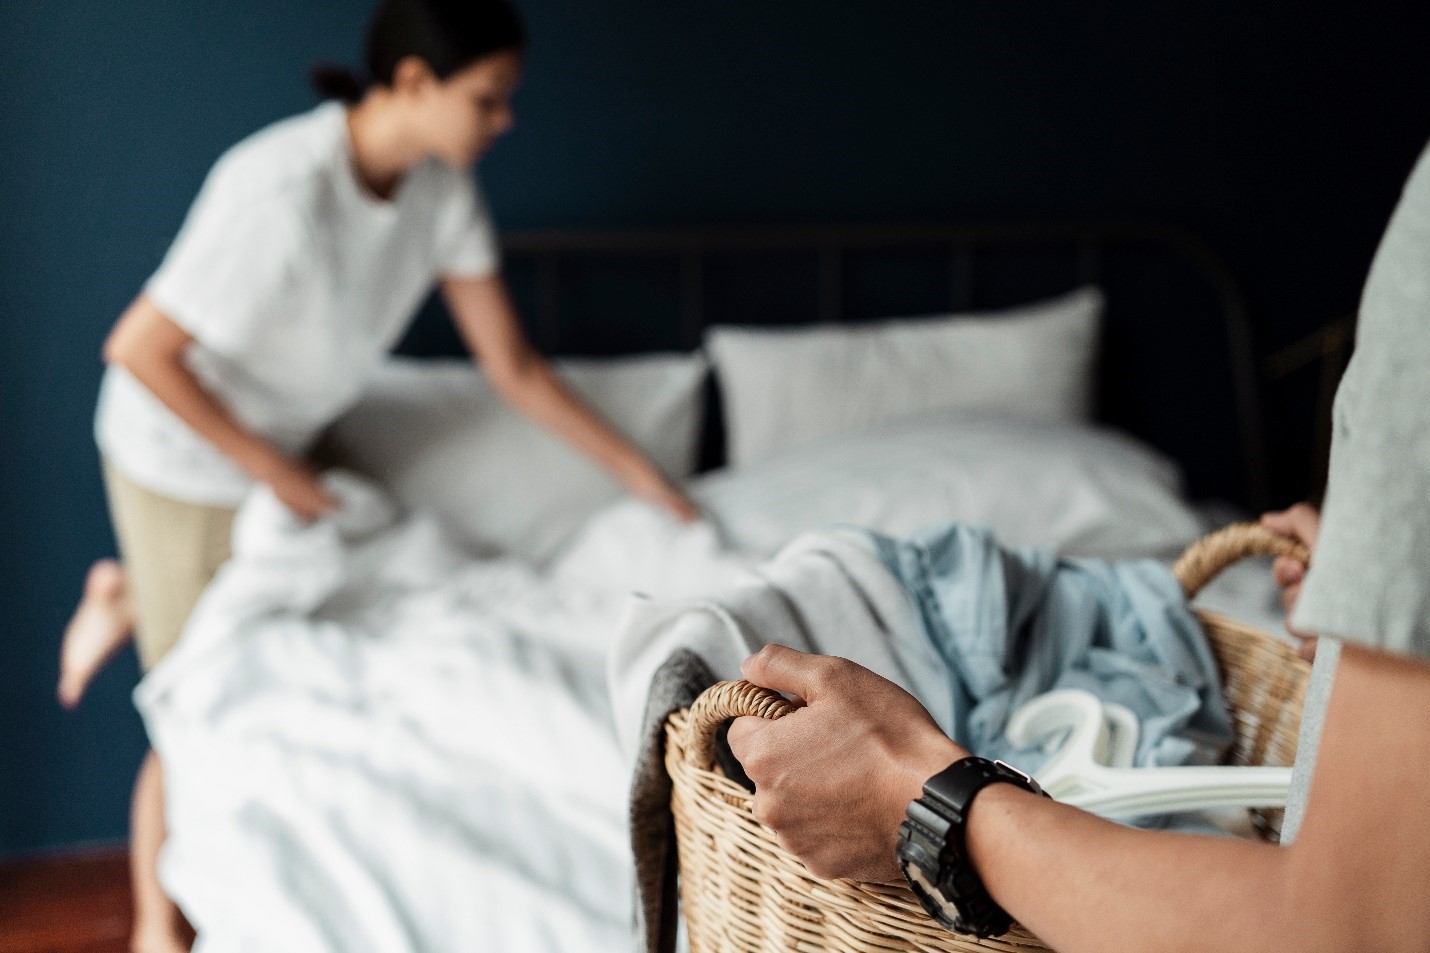 Someone brings in a basket of laundry while a woman makes the bed